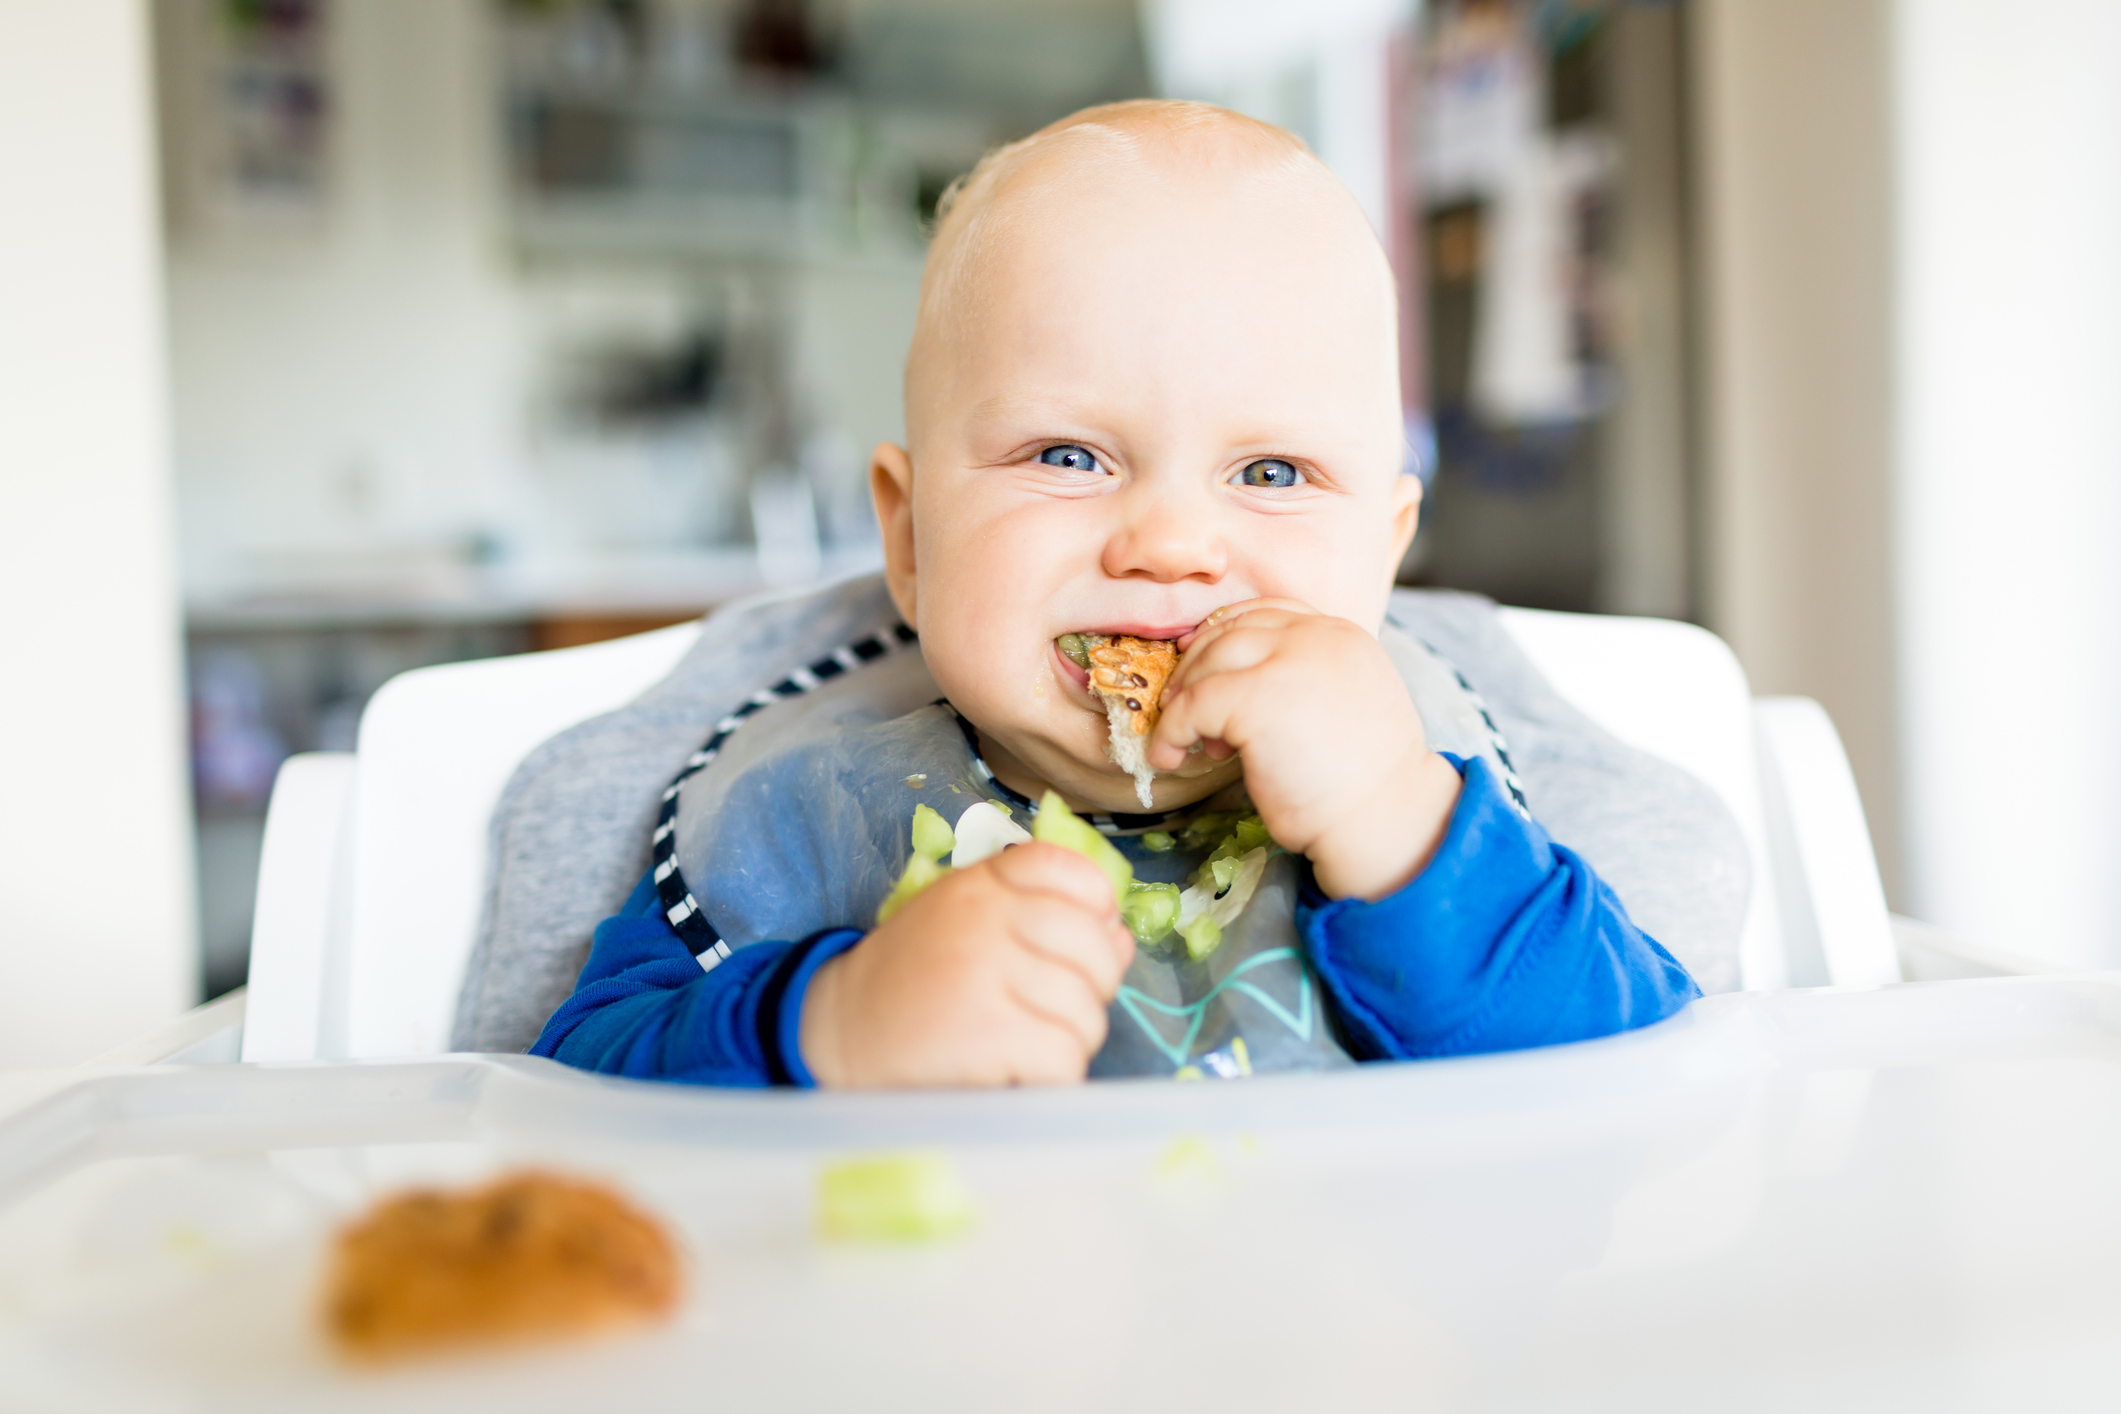 Baby-Led Weaning is a New Way of Feeding Your Baby - Learn More About it -  Health Beat